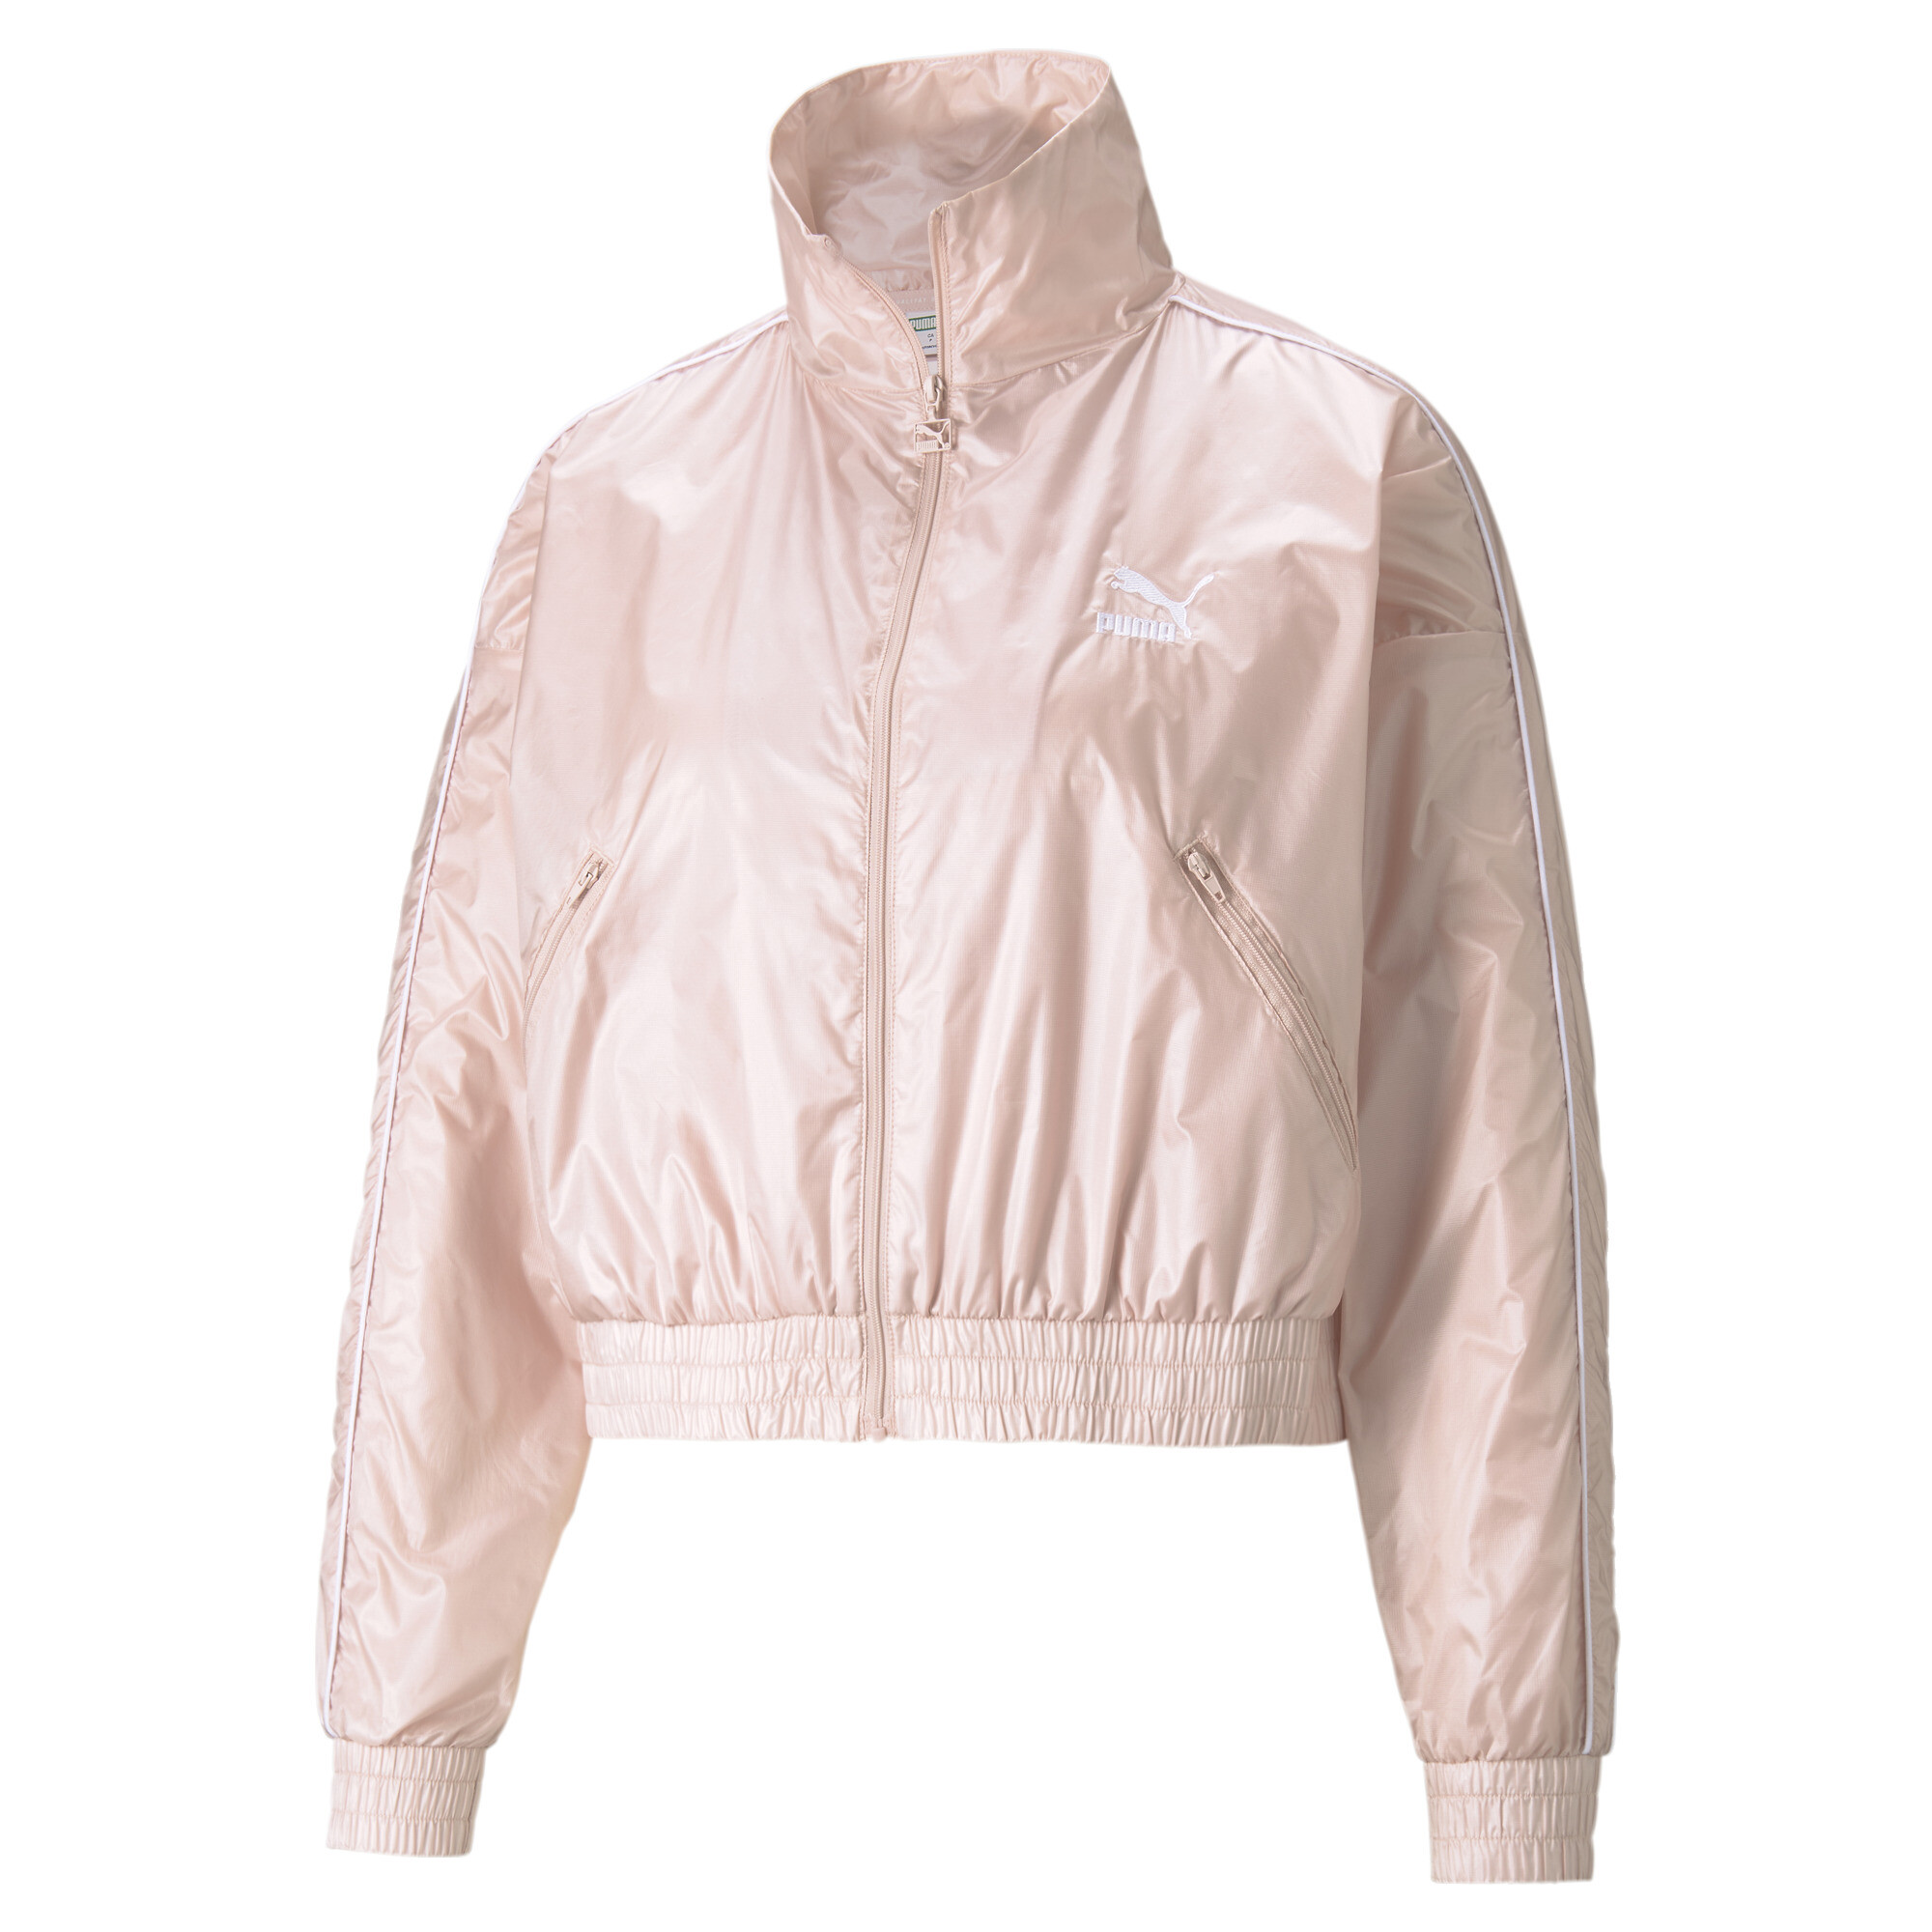 Women's Puma Iconic T7 Woven's Track Jacket, Pink, Size XS, Clothing